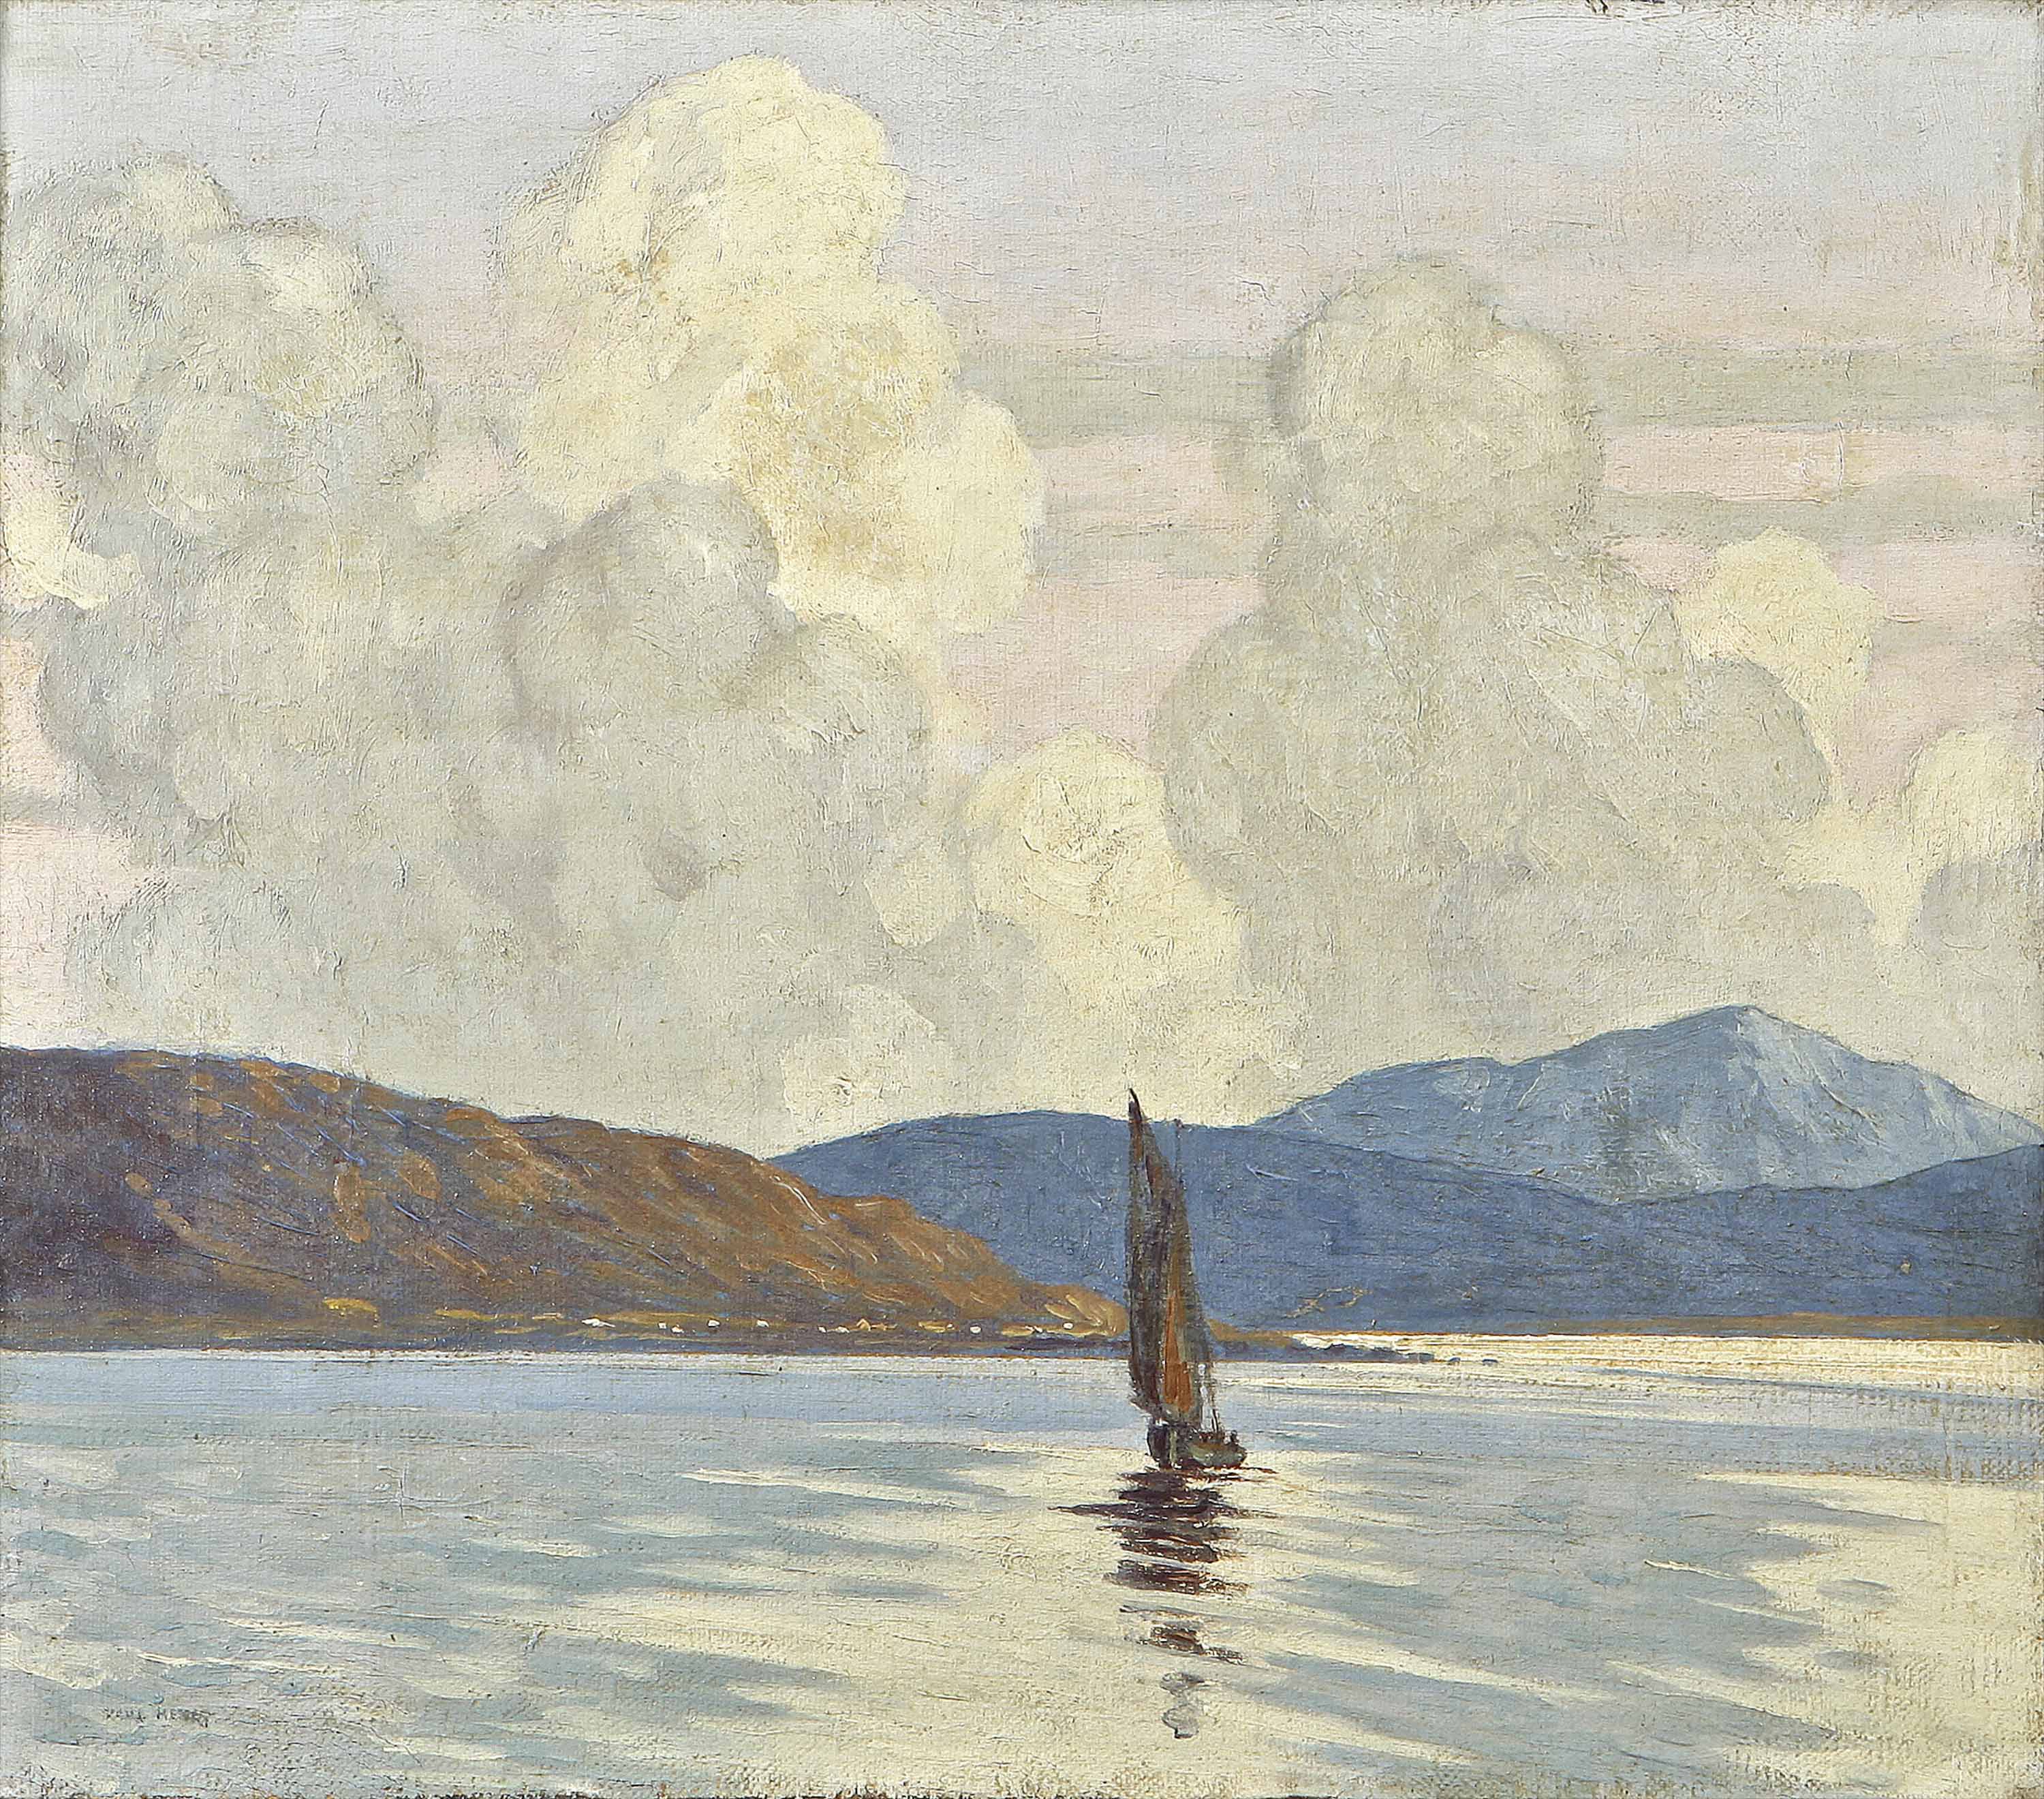 Sailing Boat on a Lough